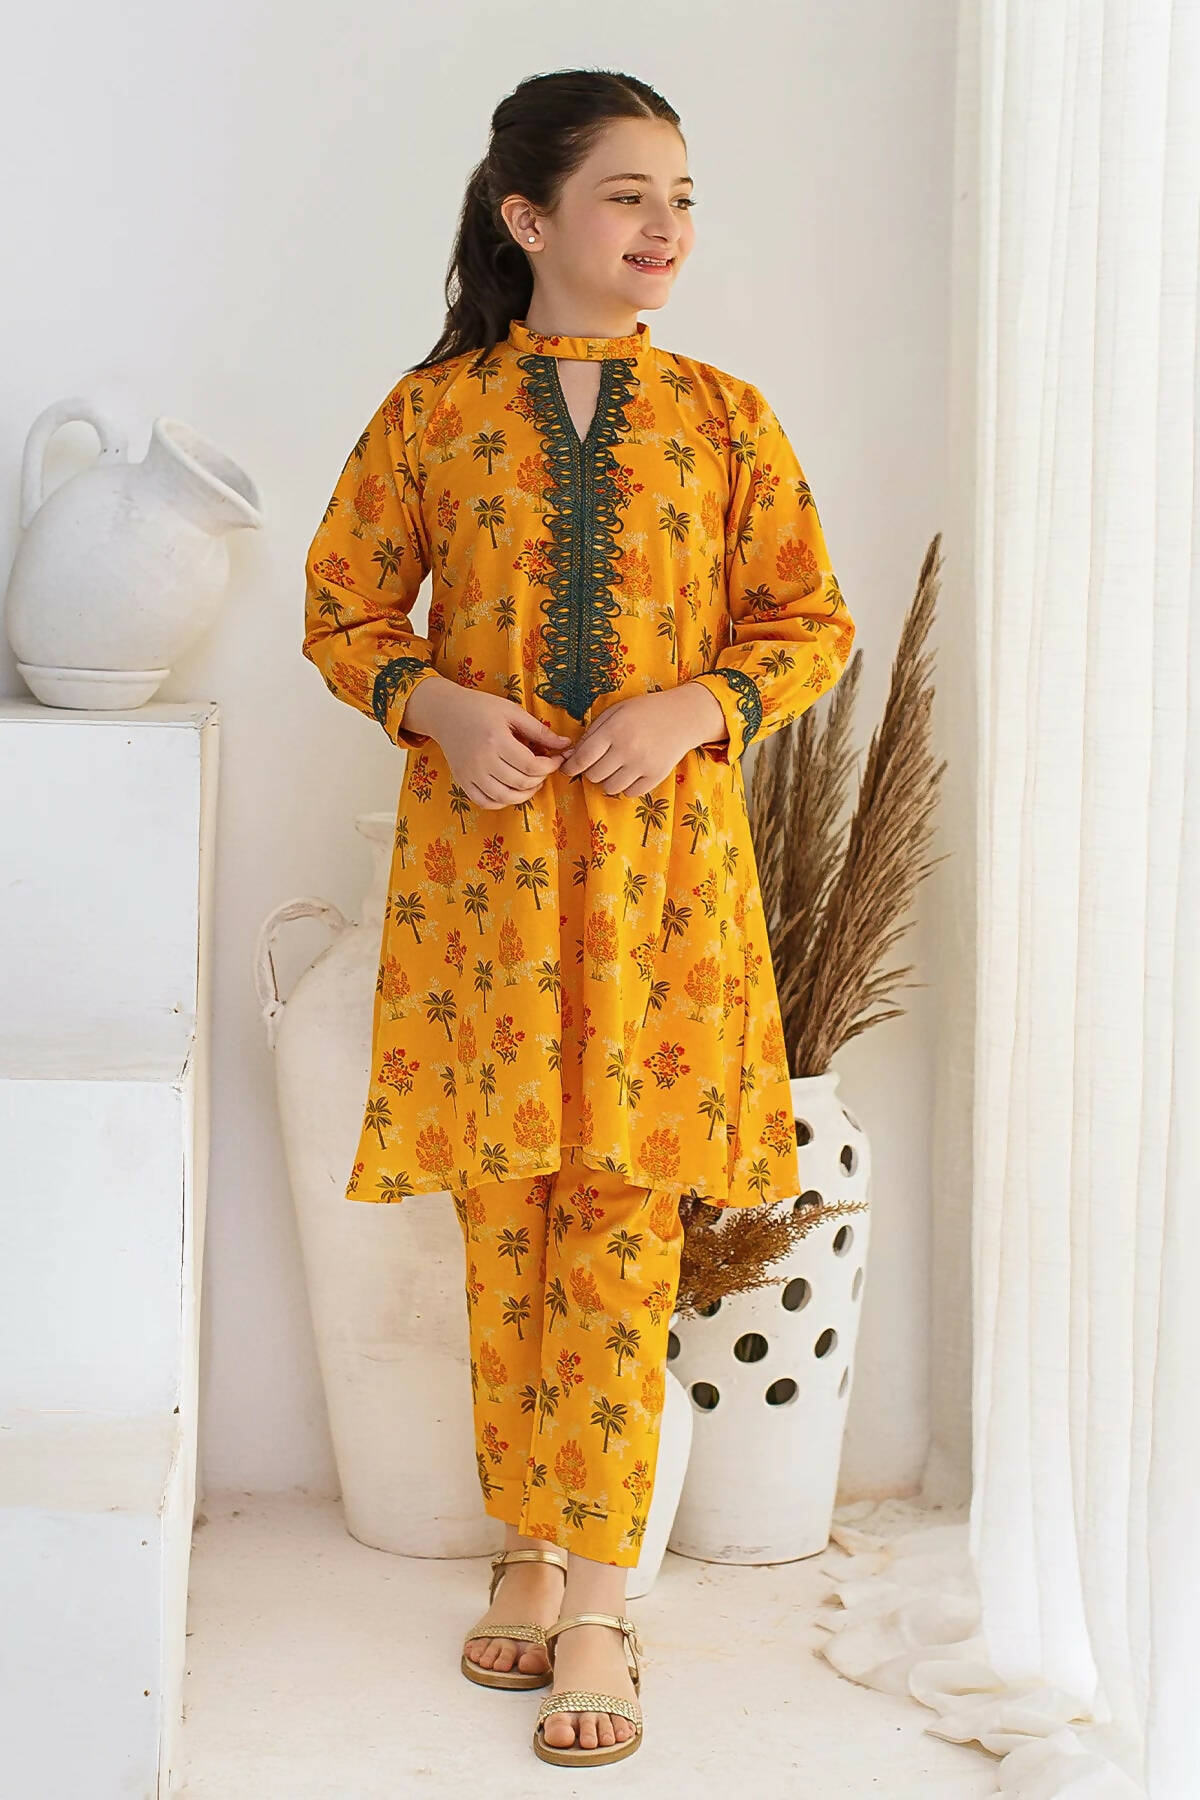 Whimsical Hues | Girls Shalwar Kameez | All Sizes | Brand New with Tags